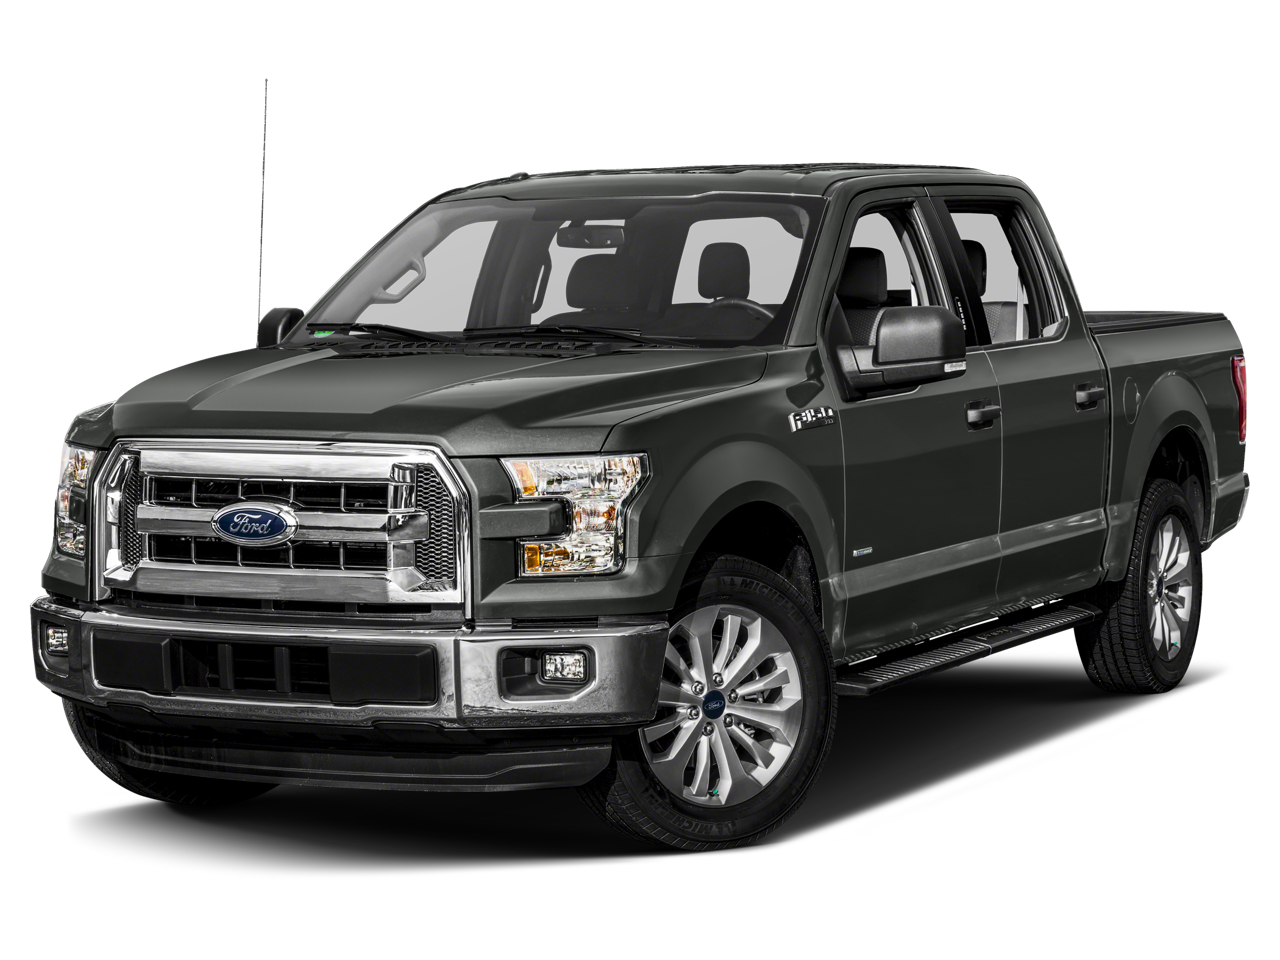 2015 Ford F-150 4X4